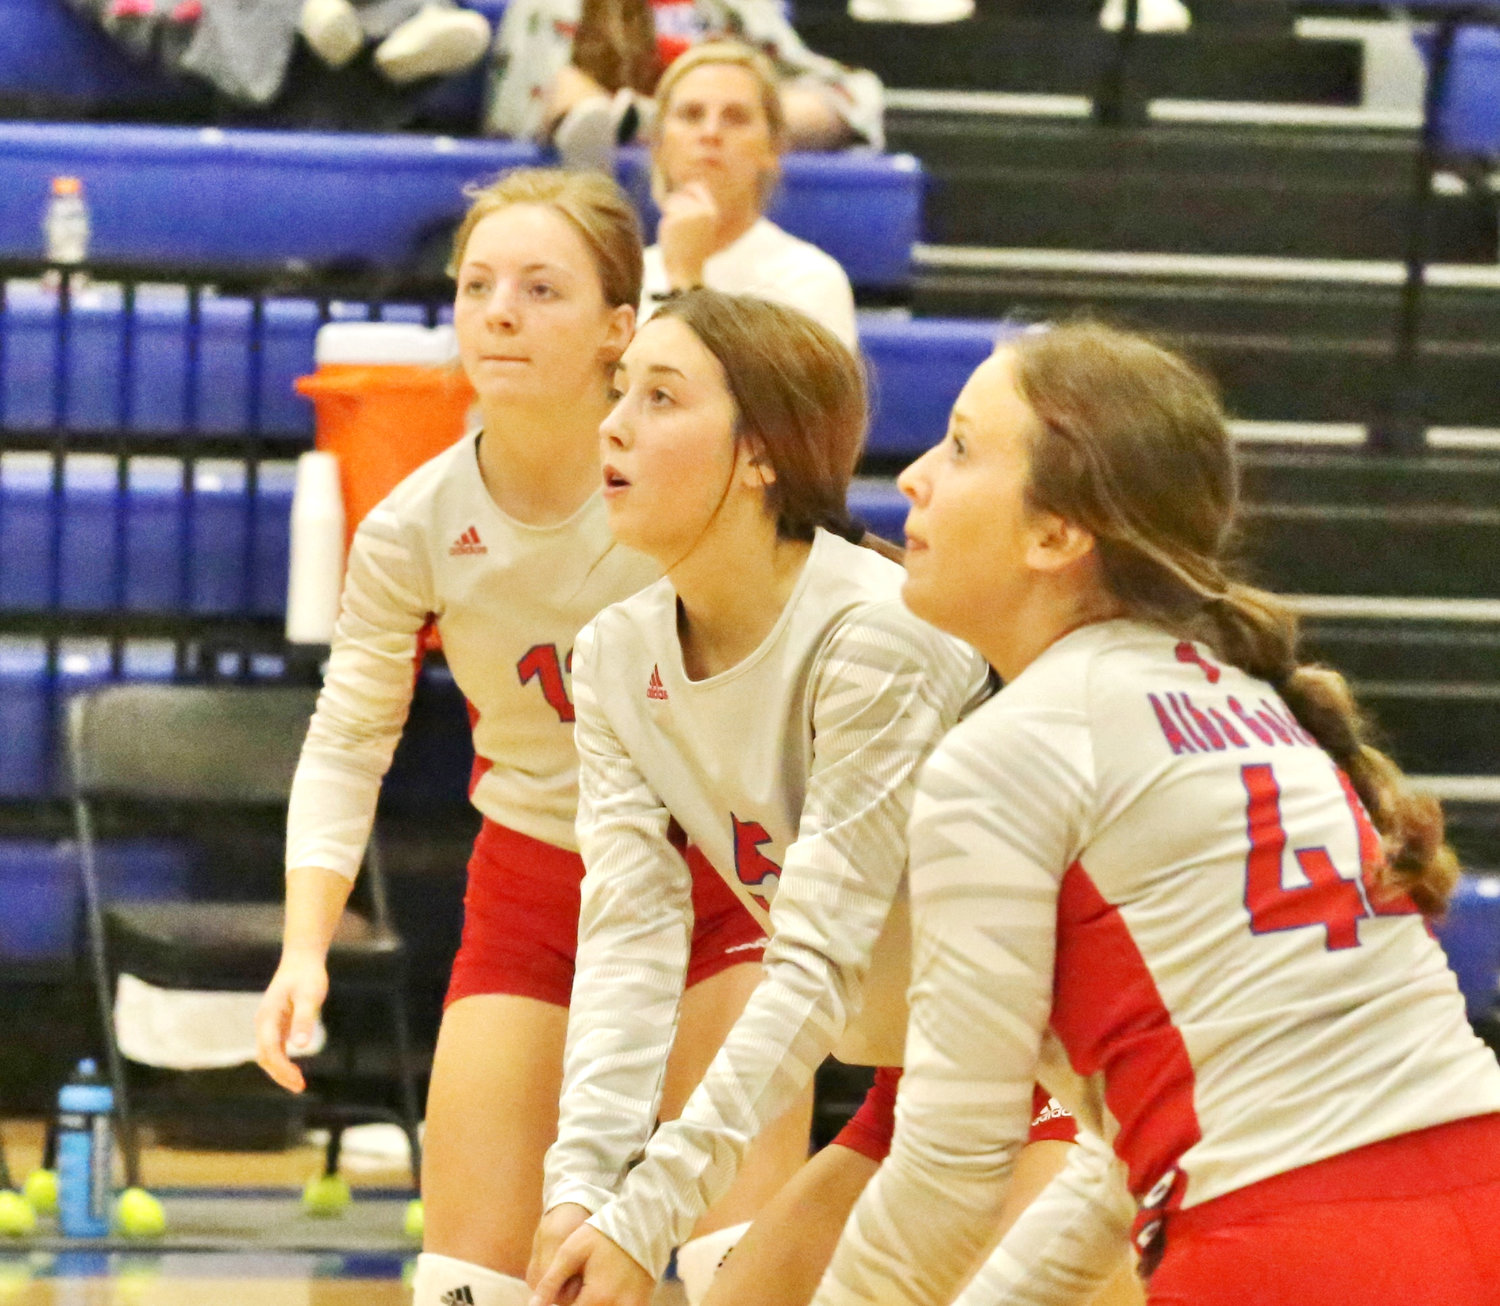 The Alba-Golden back line readies to dig a serve. From left Cacie Lennon, Kamrin Wright and Skyler West. In the background Coach Jamie Webster anticipates the action.